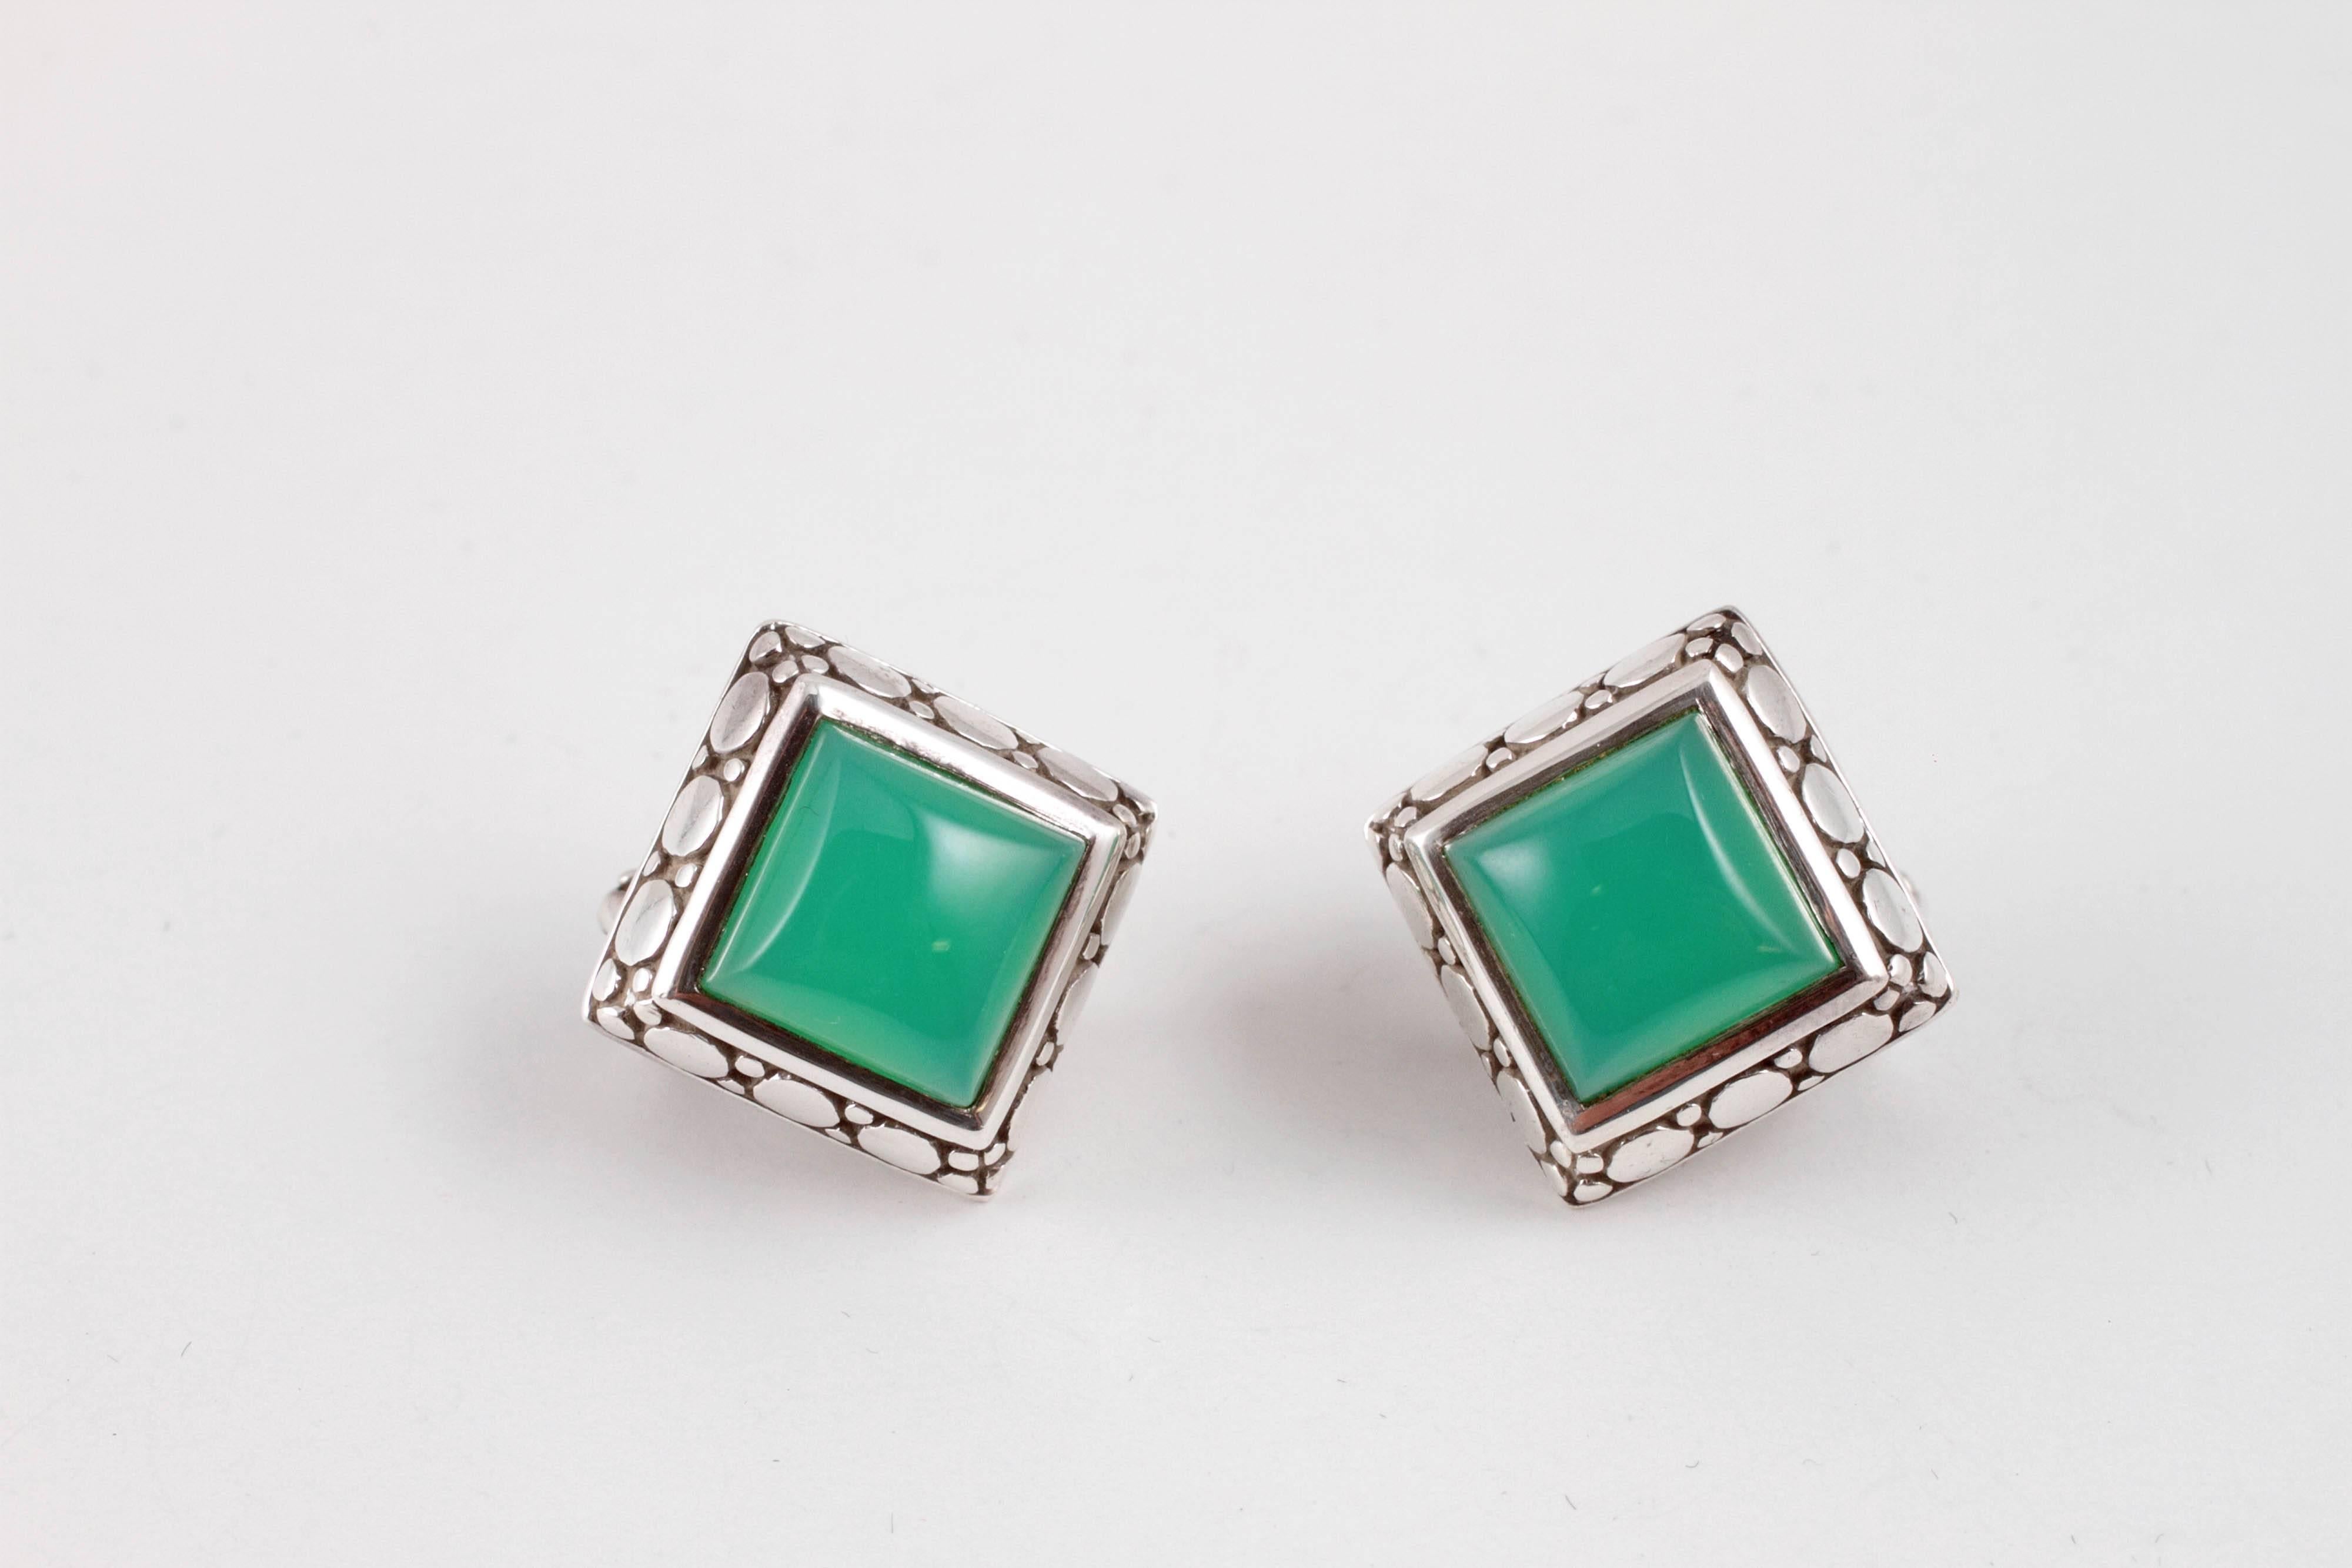 Fun and colorful John Hardy earrings.  These square cabochon chrysoprase earrings sit right on the ear, and are secured with omega backs.